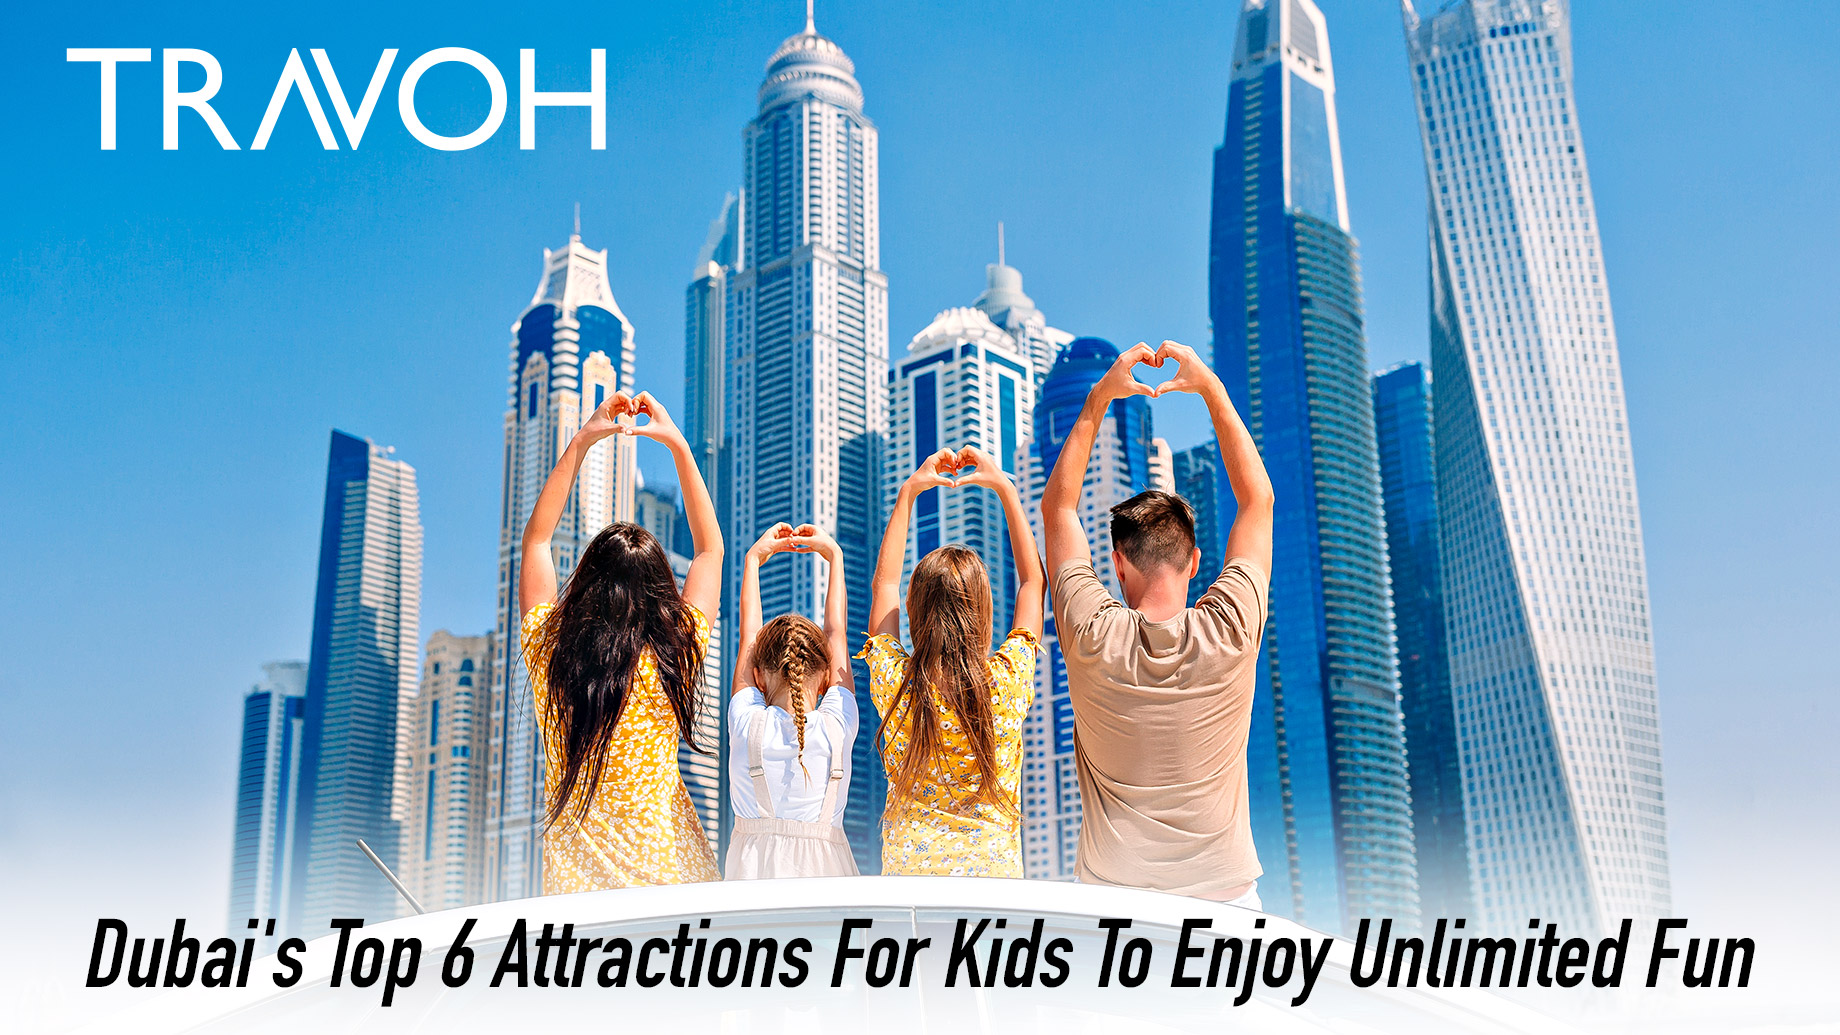 Dubai's Top 6 Attractions For Kids To Enjoy Unlimited Fun